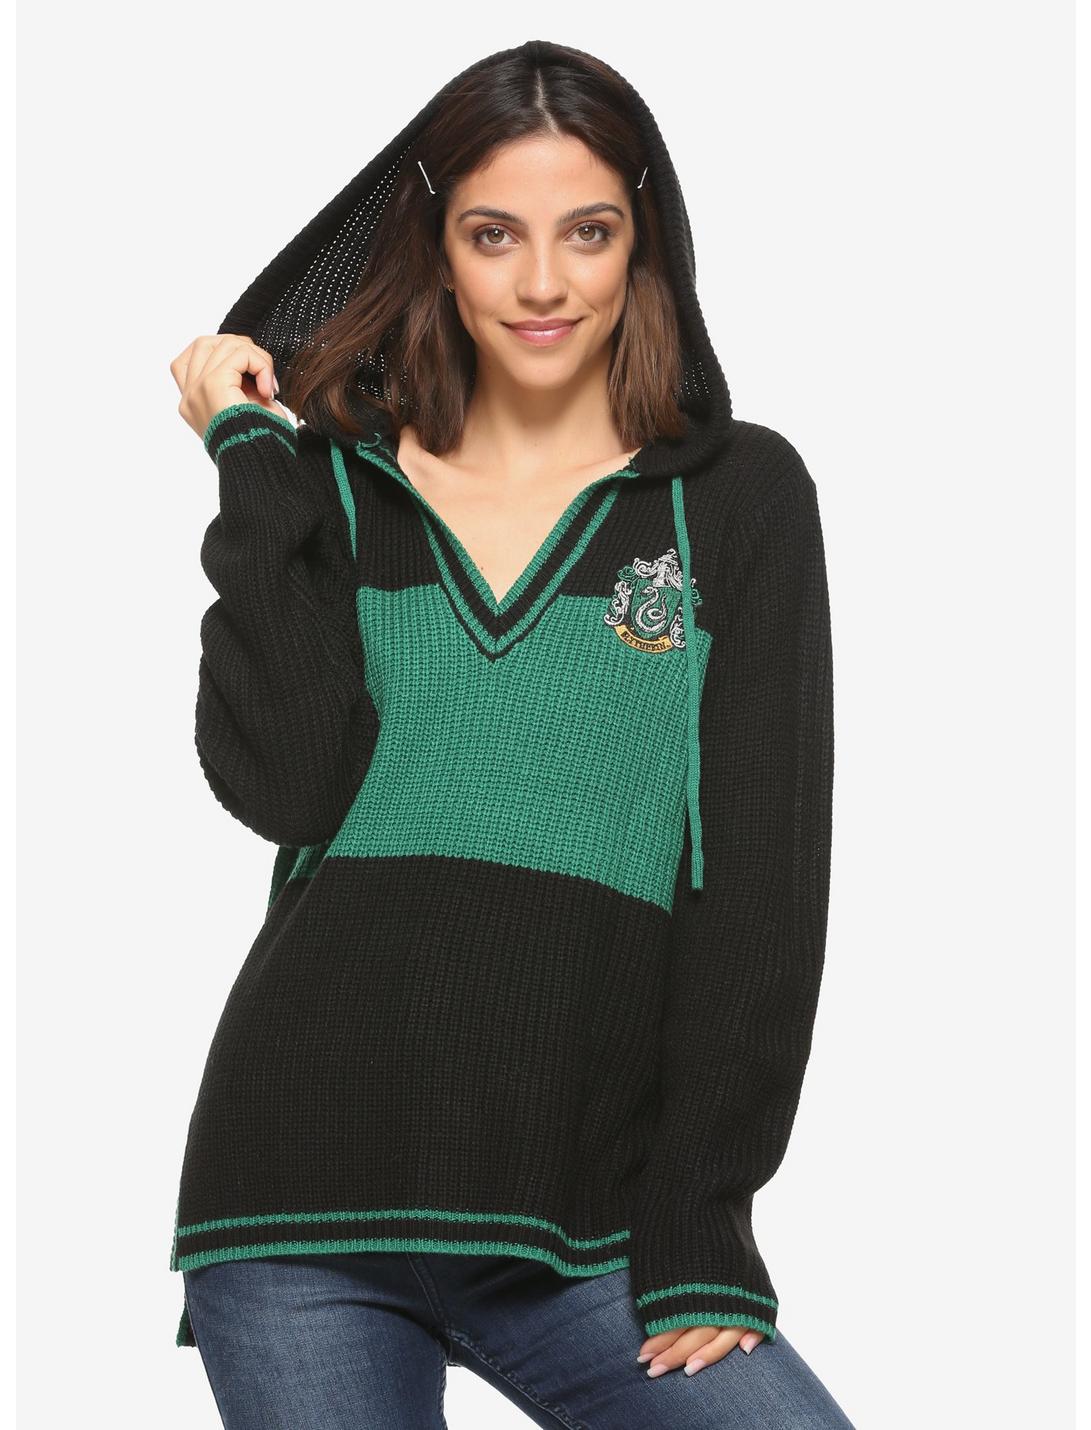 Harry Potter Slytherin Girls Hooded Sweater, GREEN, hi-res